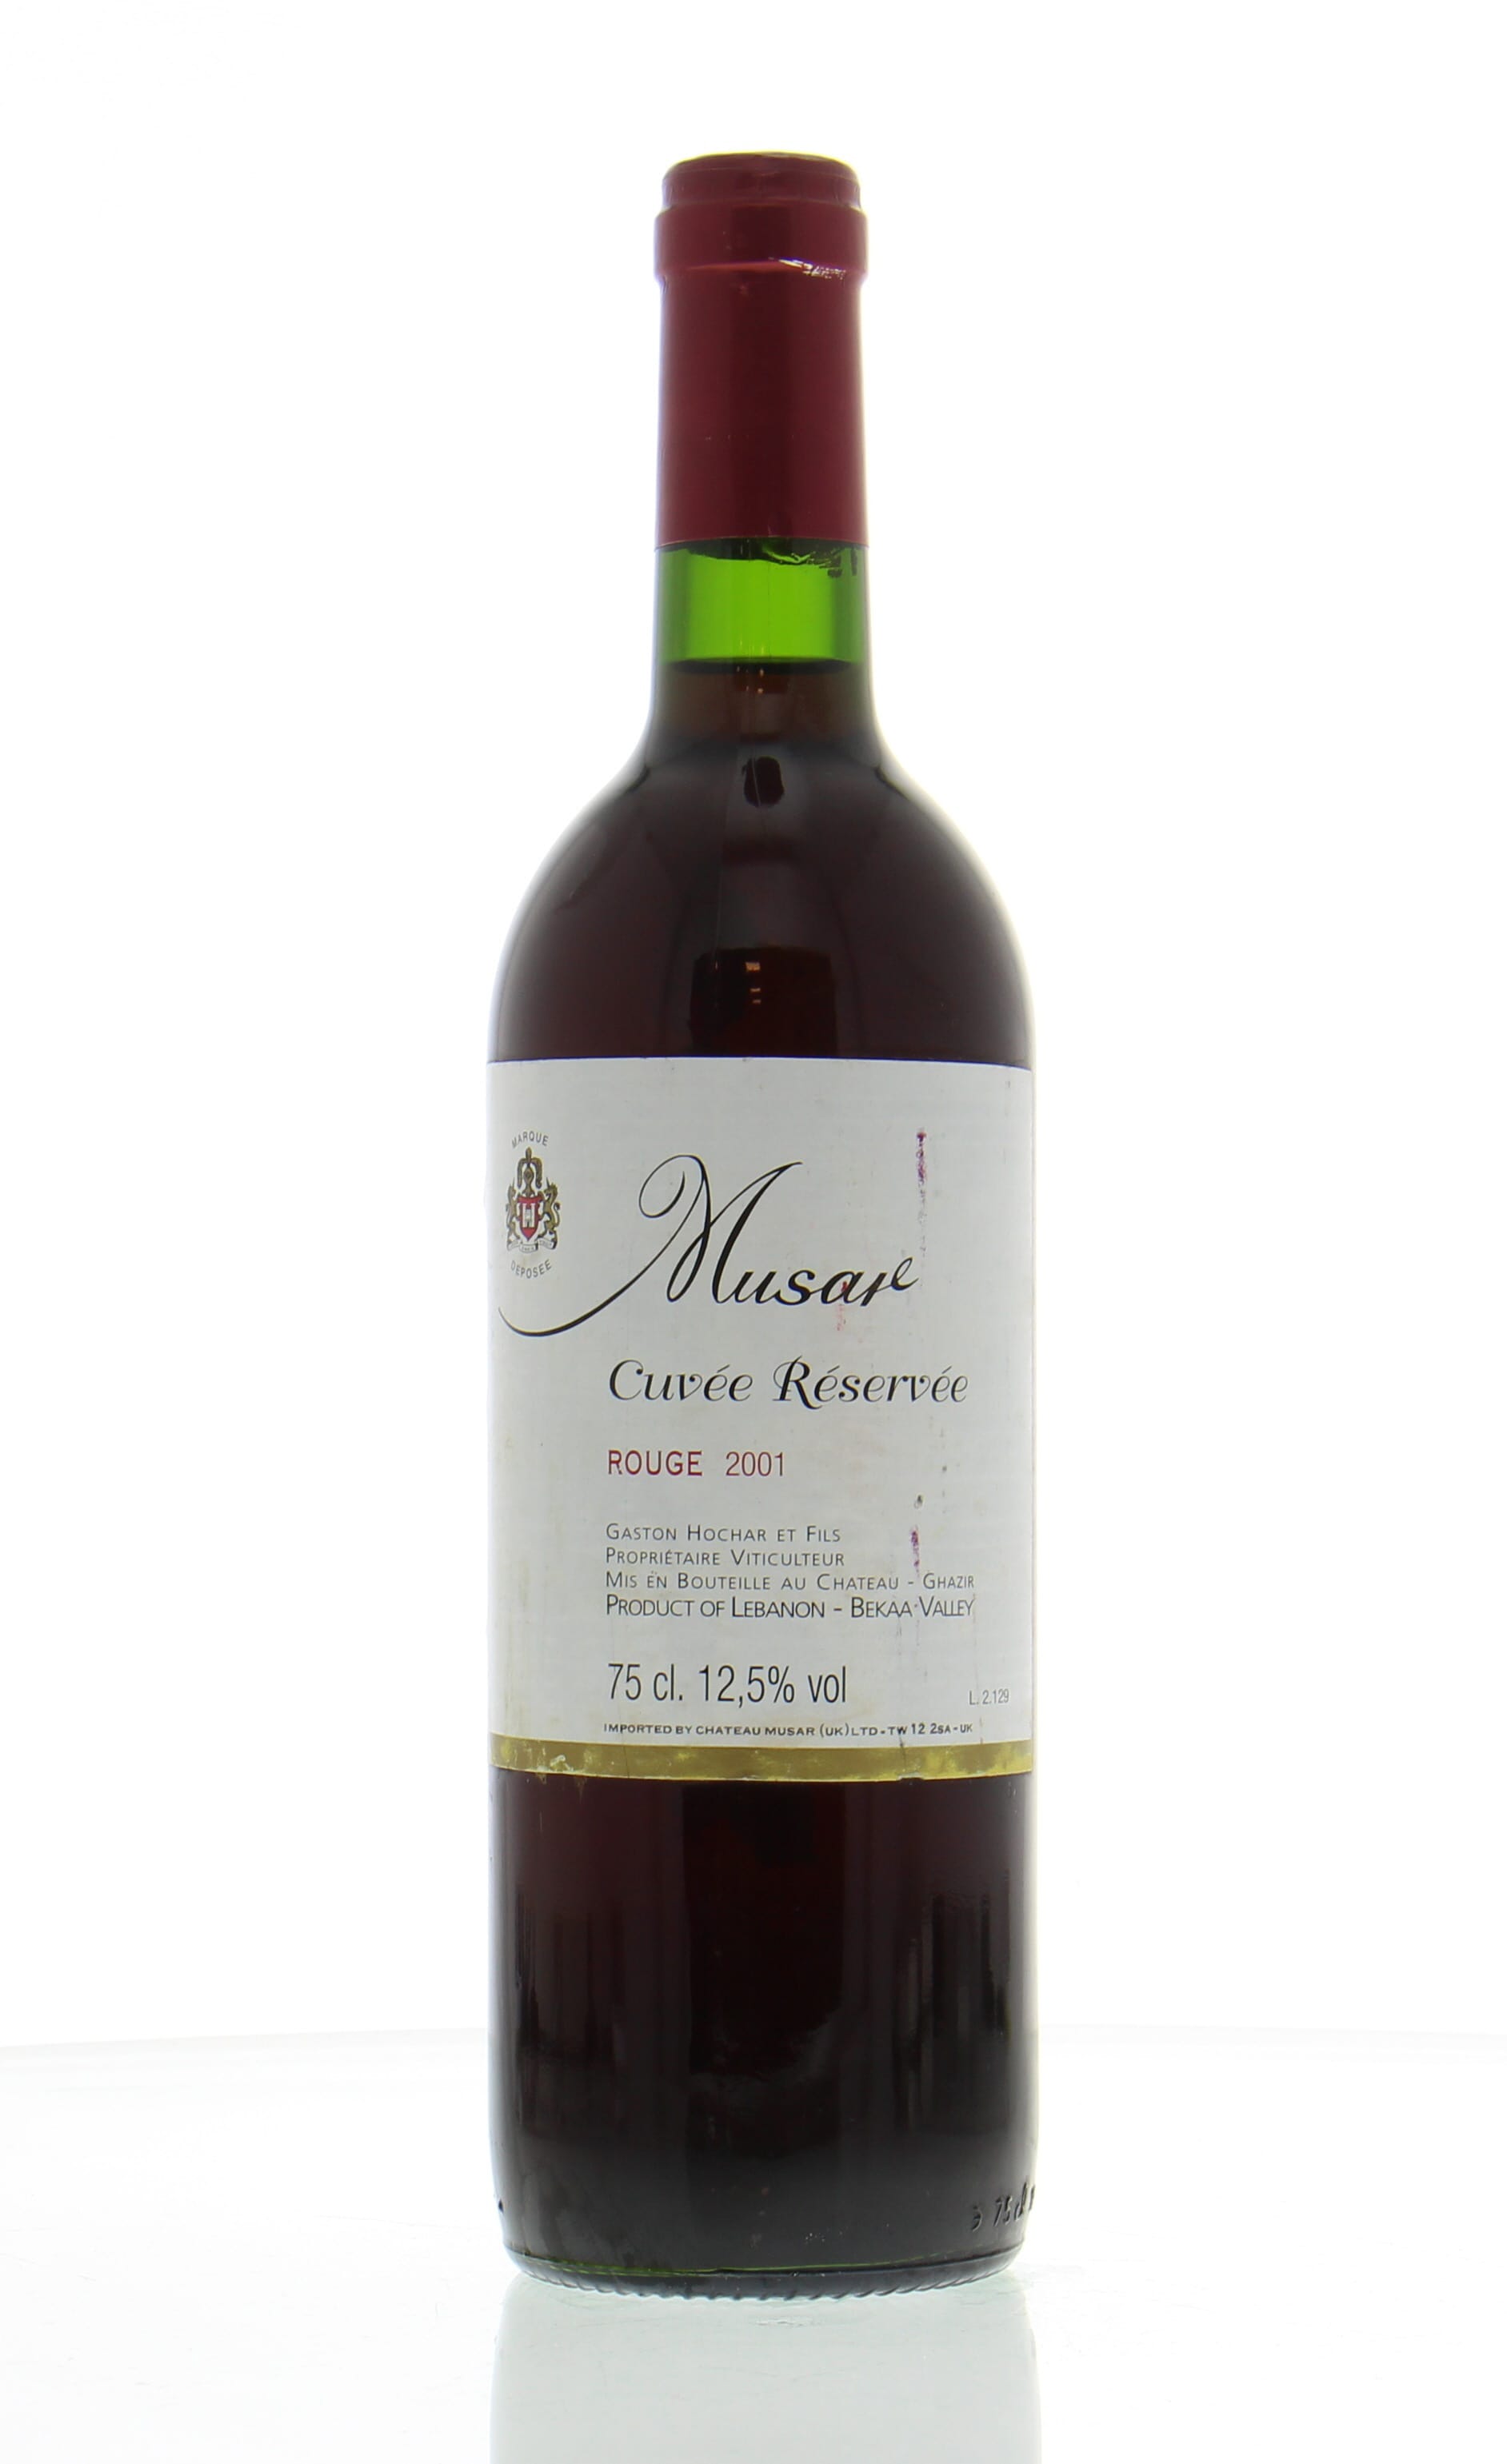 Chateau Musar - Cuvee Reservee 2001 Perfect